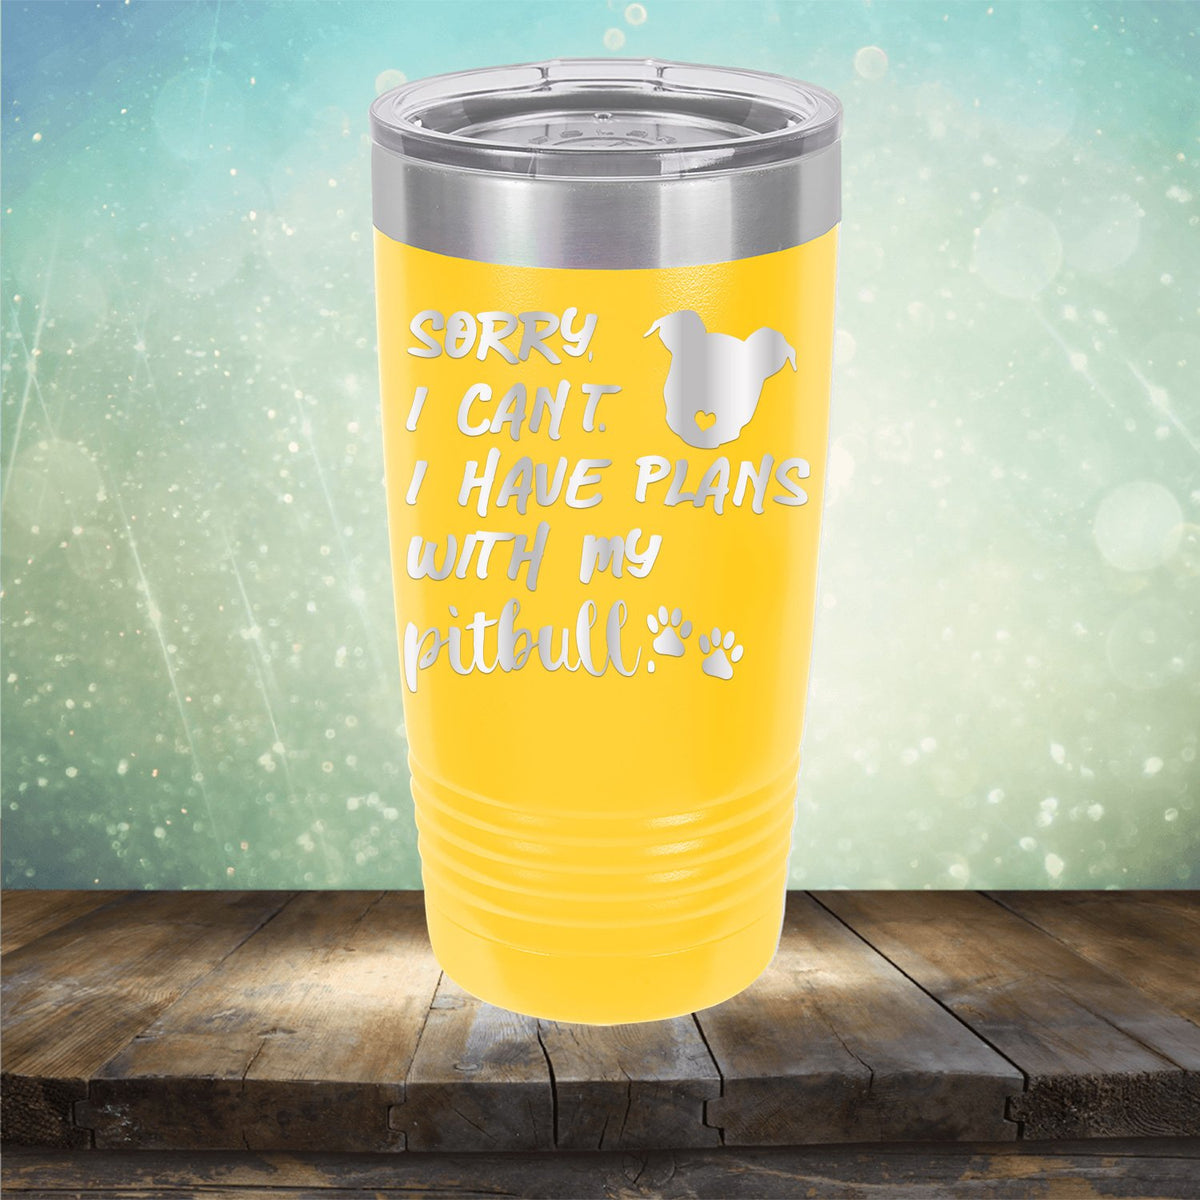 Sorry I Can&#39;t I Have Plans with My Pitbull - Laser Etched Tumbler Mug